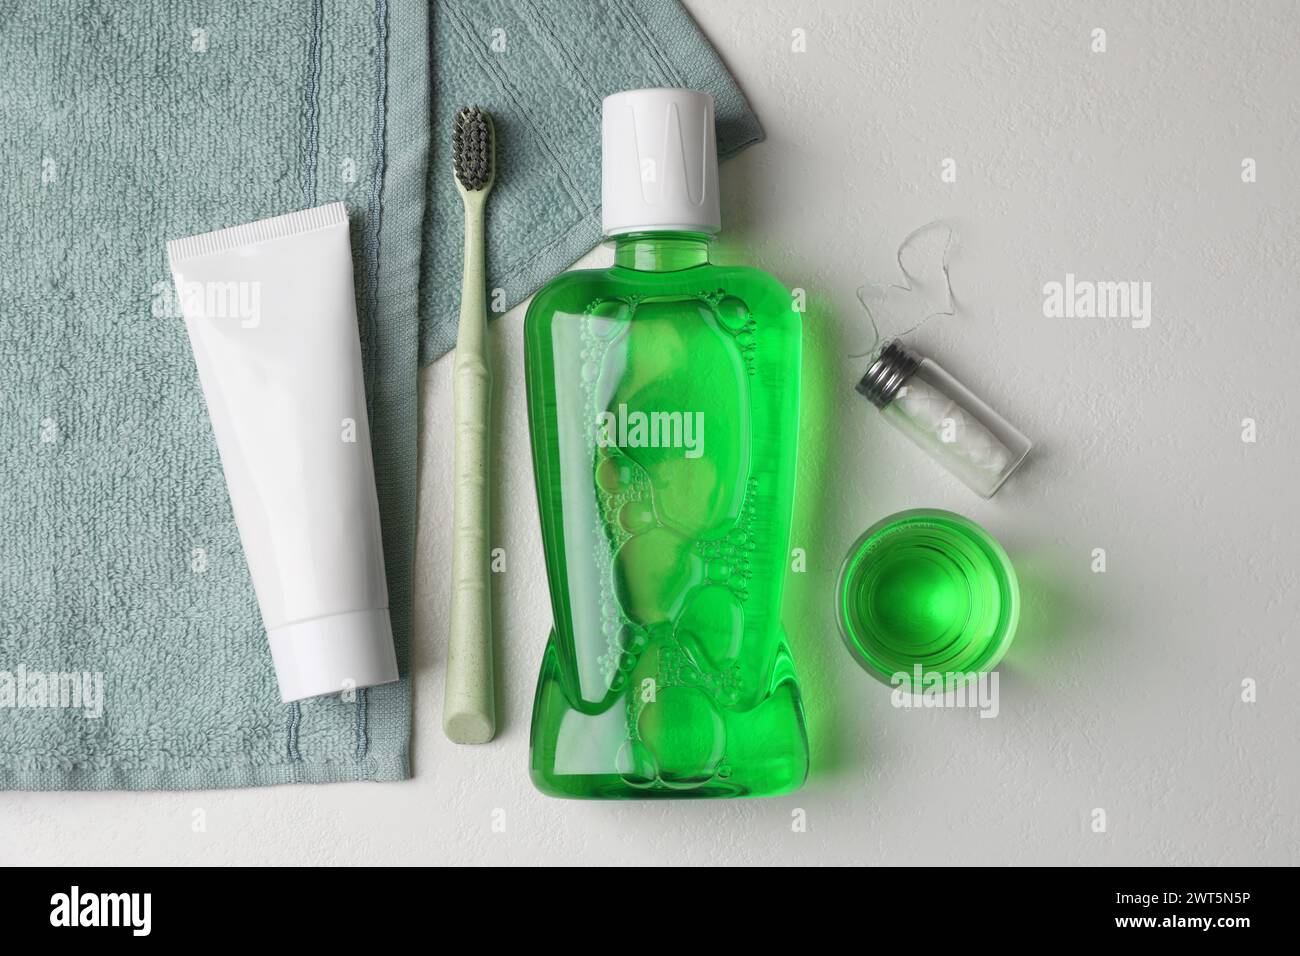 Fresh mouthwash in bottle, glass, toothbrush, toothpaste and dental floss on light background, flat lay Stock Photo